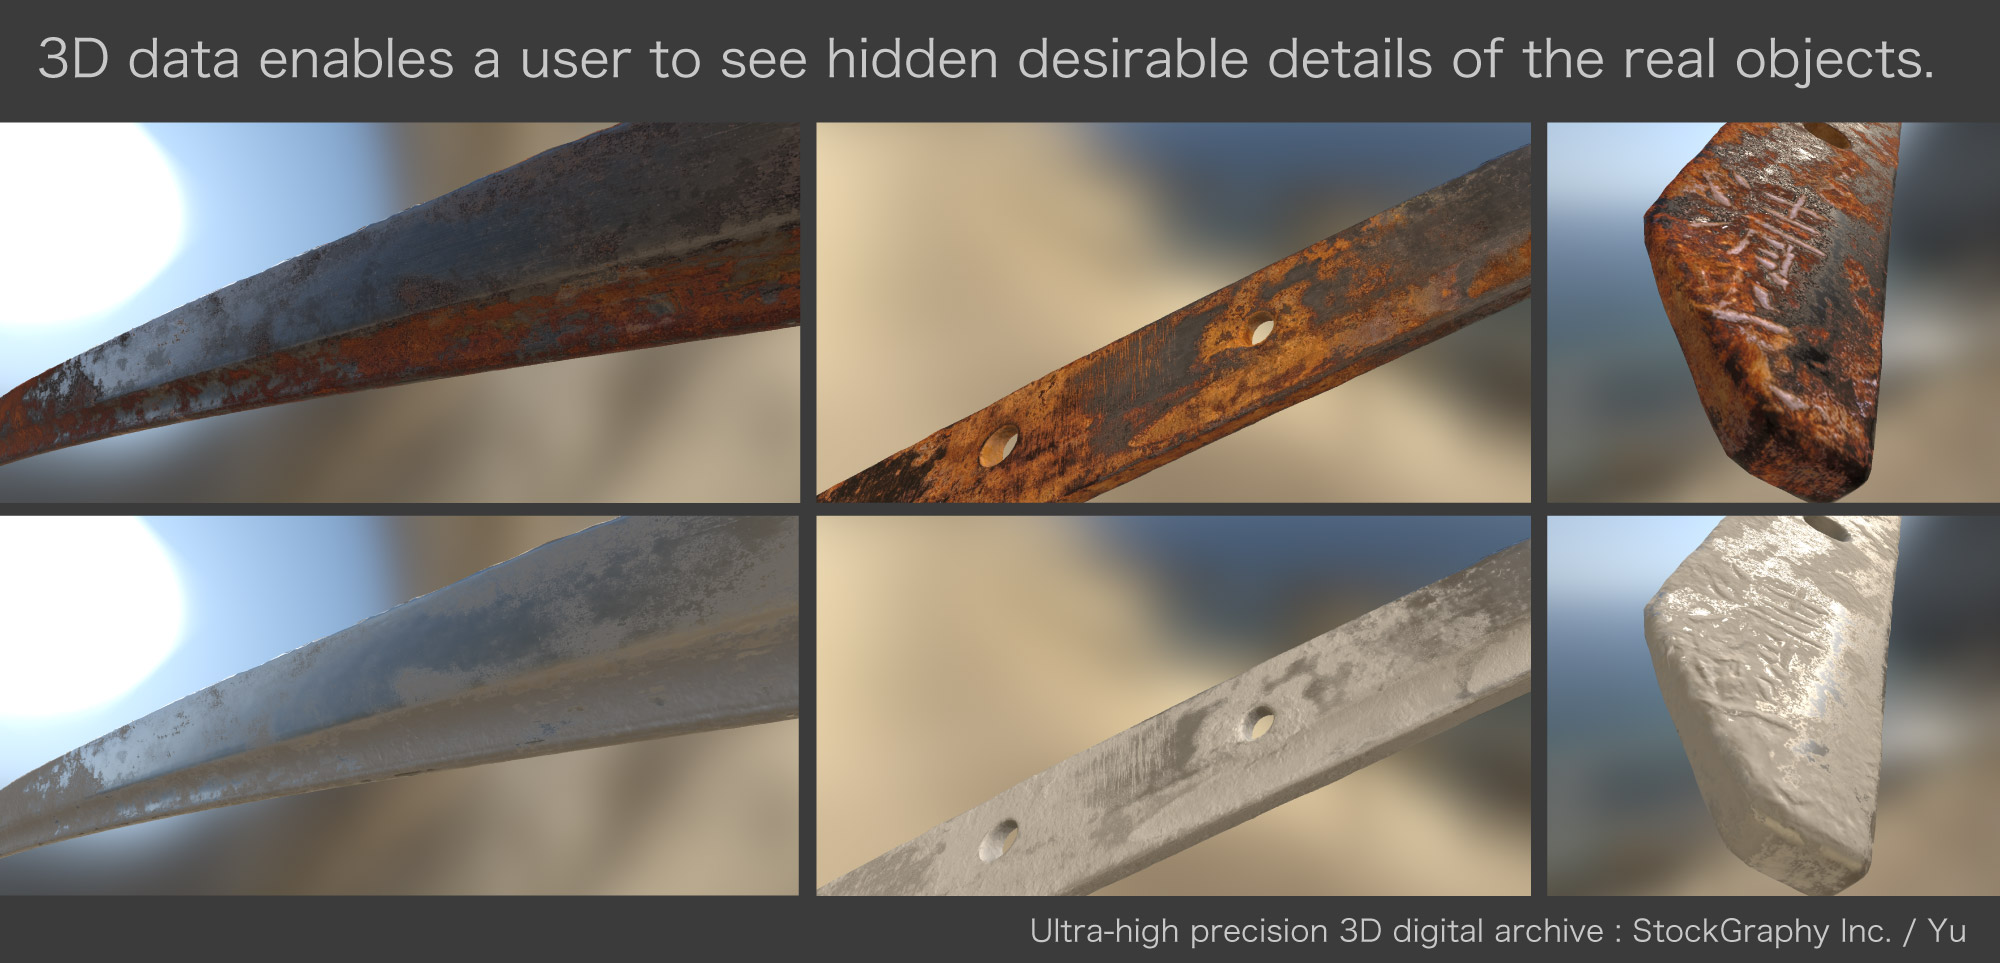 Digi:reBUILD 3D data enable a user to see hidden details of the objects.